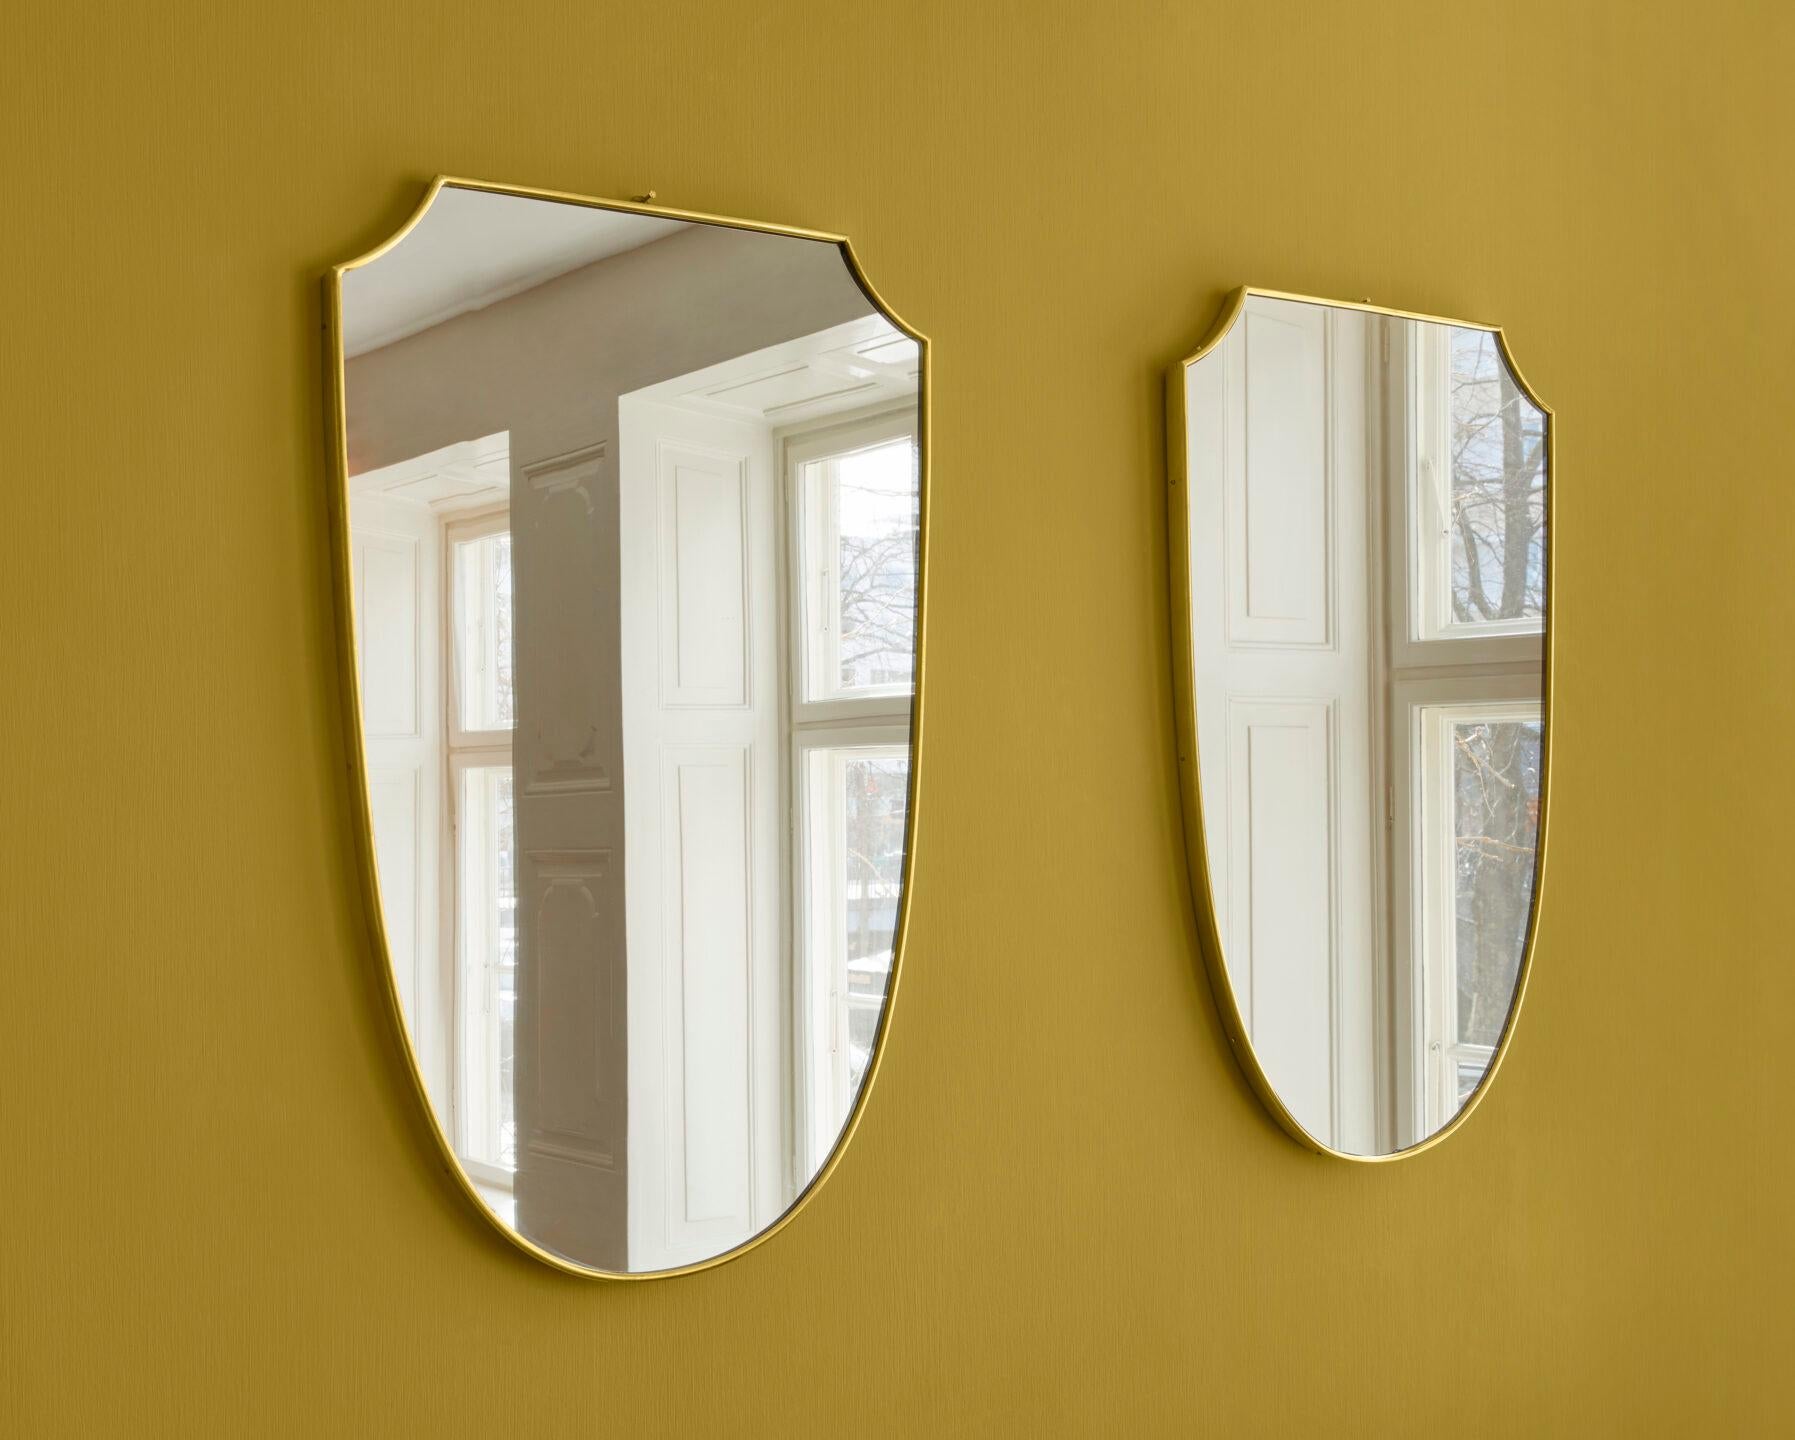 Italy, 1950s

A pair of brass mirrors.

Measures: H 75 x W 48 x D 2.5 cm.